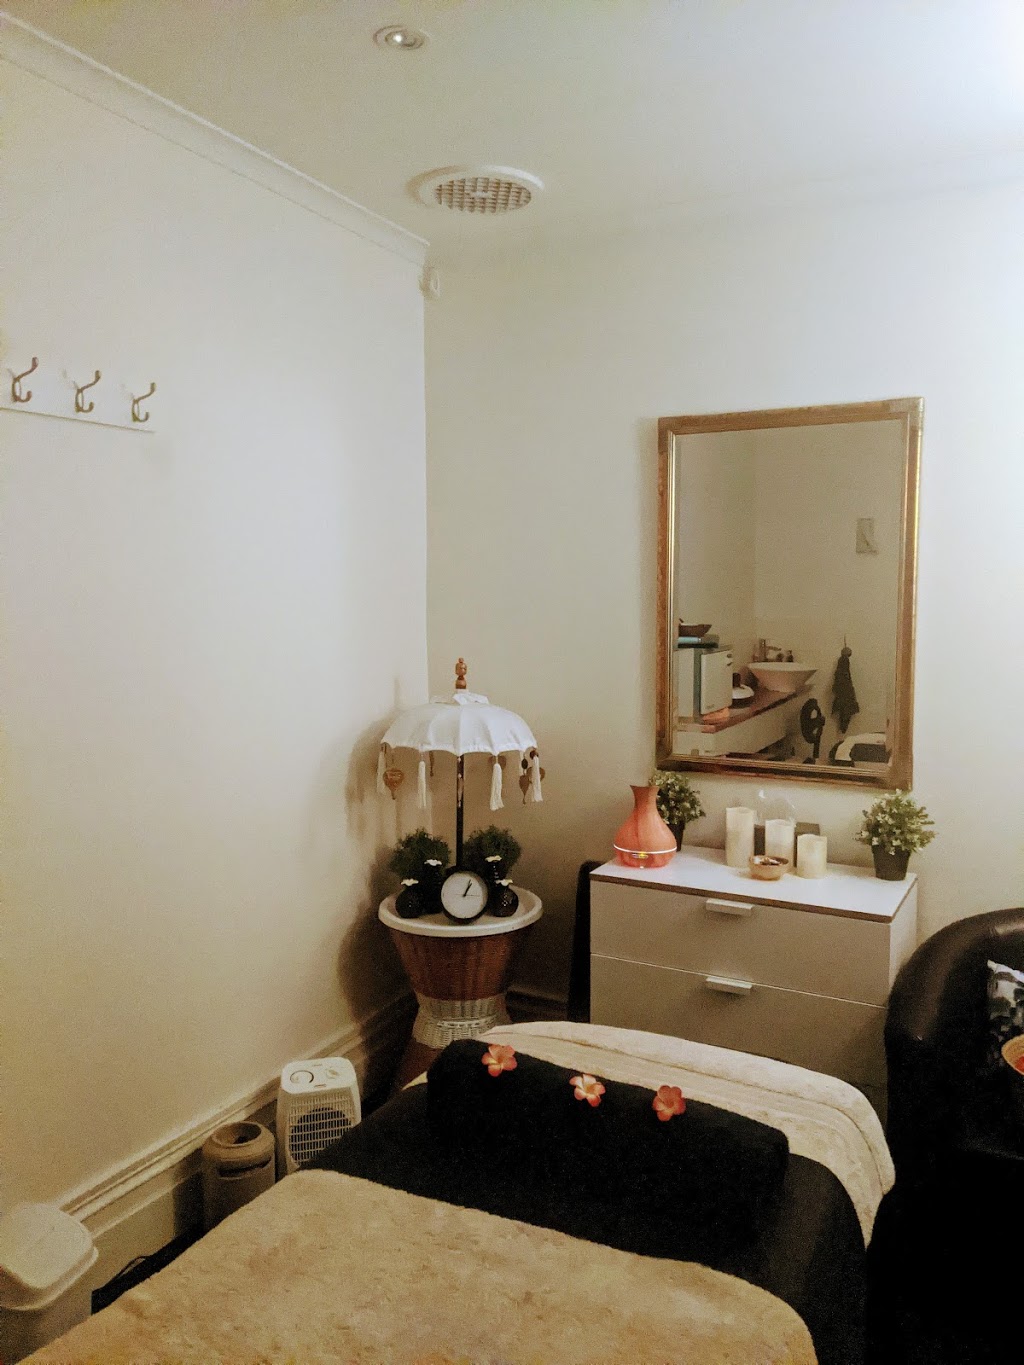 Balinese Therapeutic massage and facial | Shop/26 Huntriss St, Torrensville SA 5031, Australia | Phone: 0431 311 613